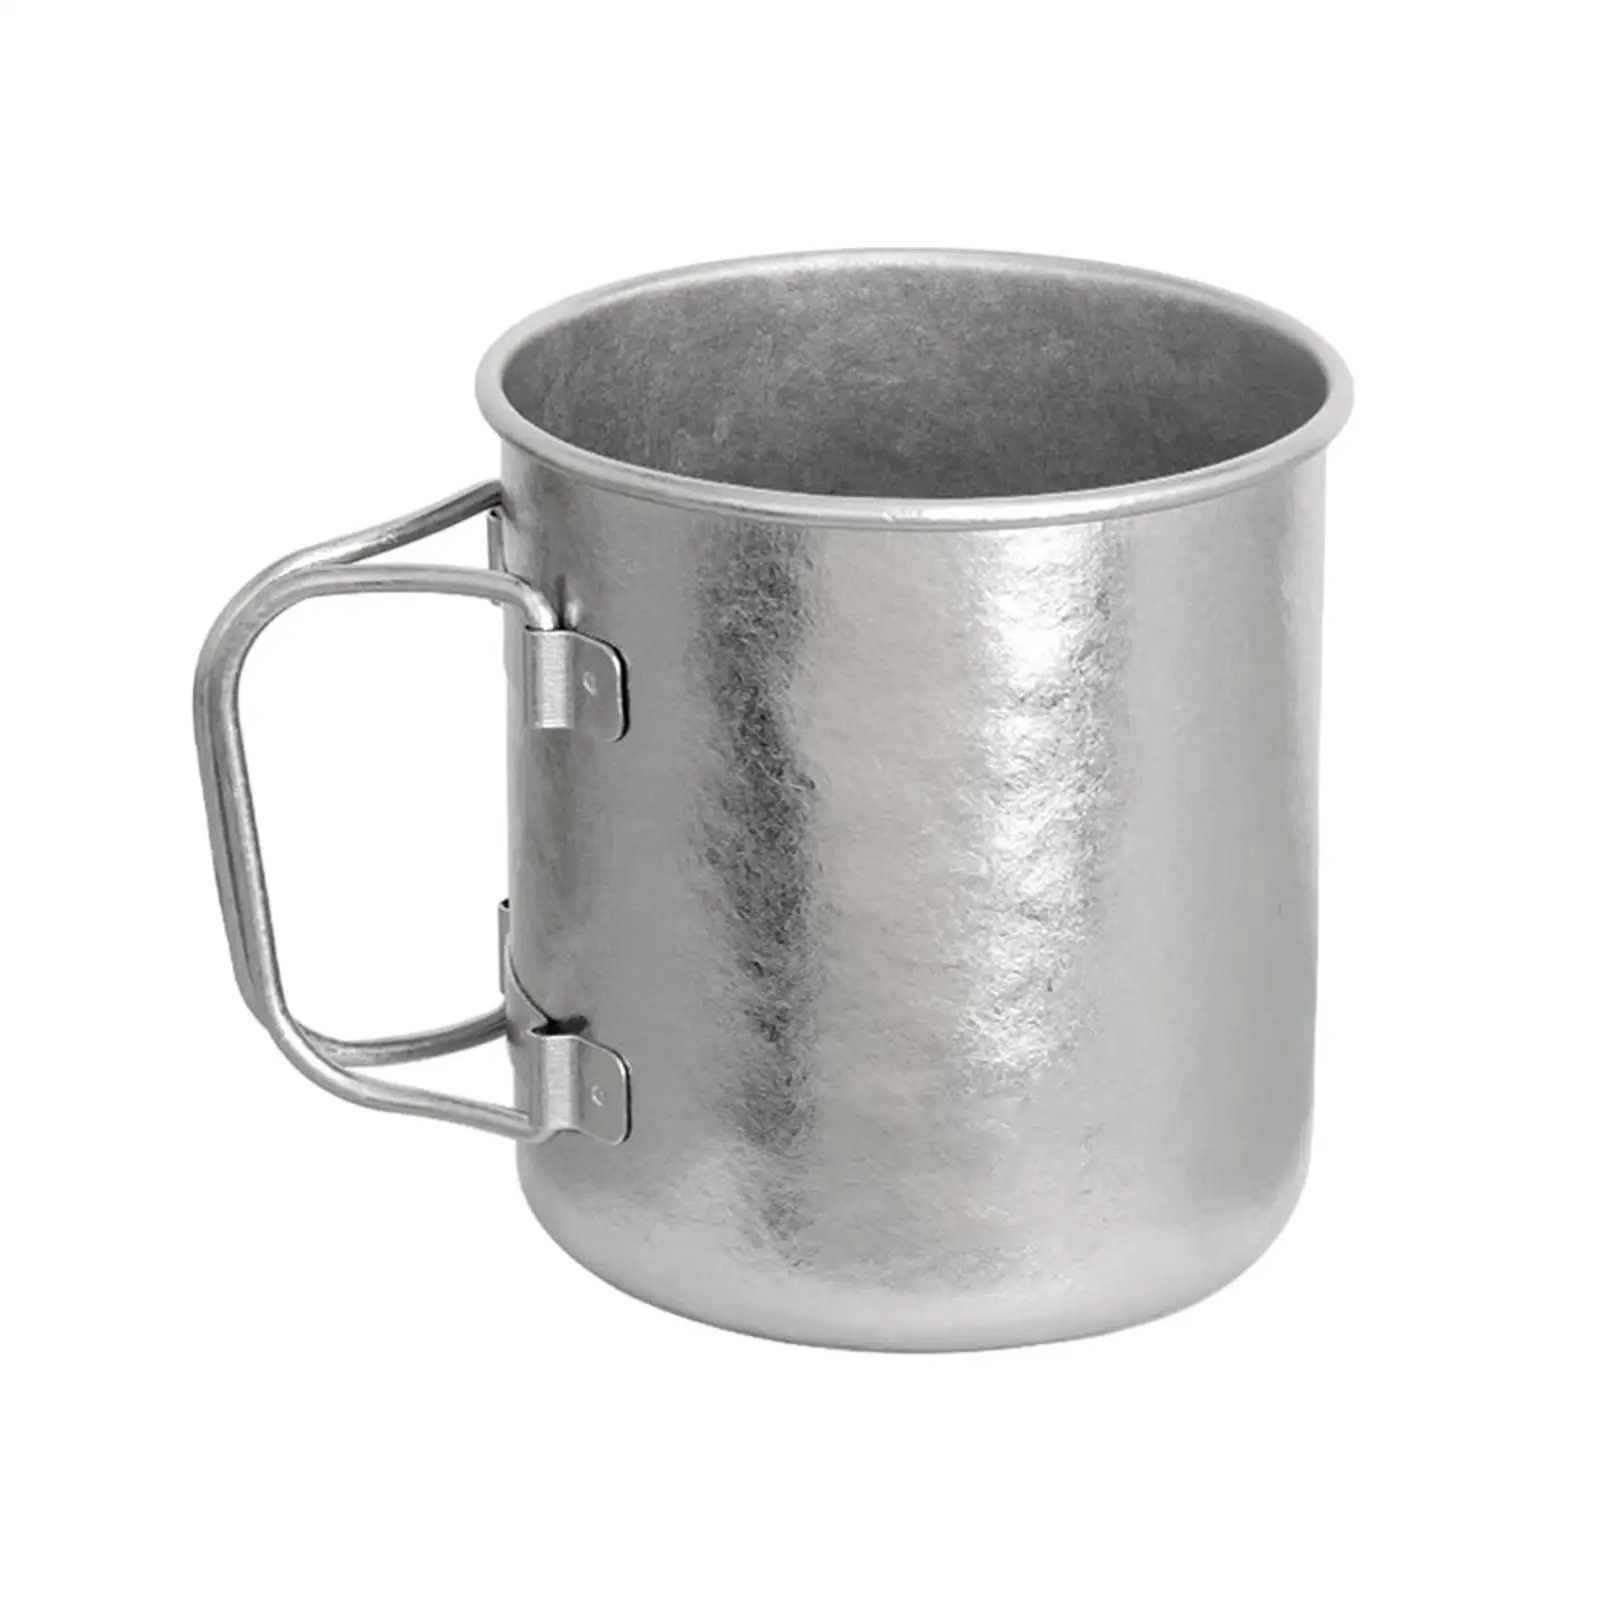 450ml Titanium Cup Camping Mug with Handle Water Cup for Outdoor Activities